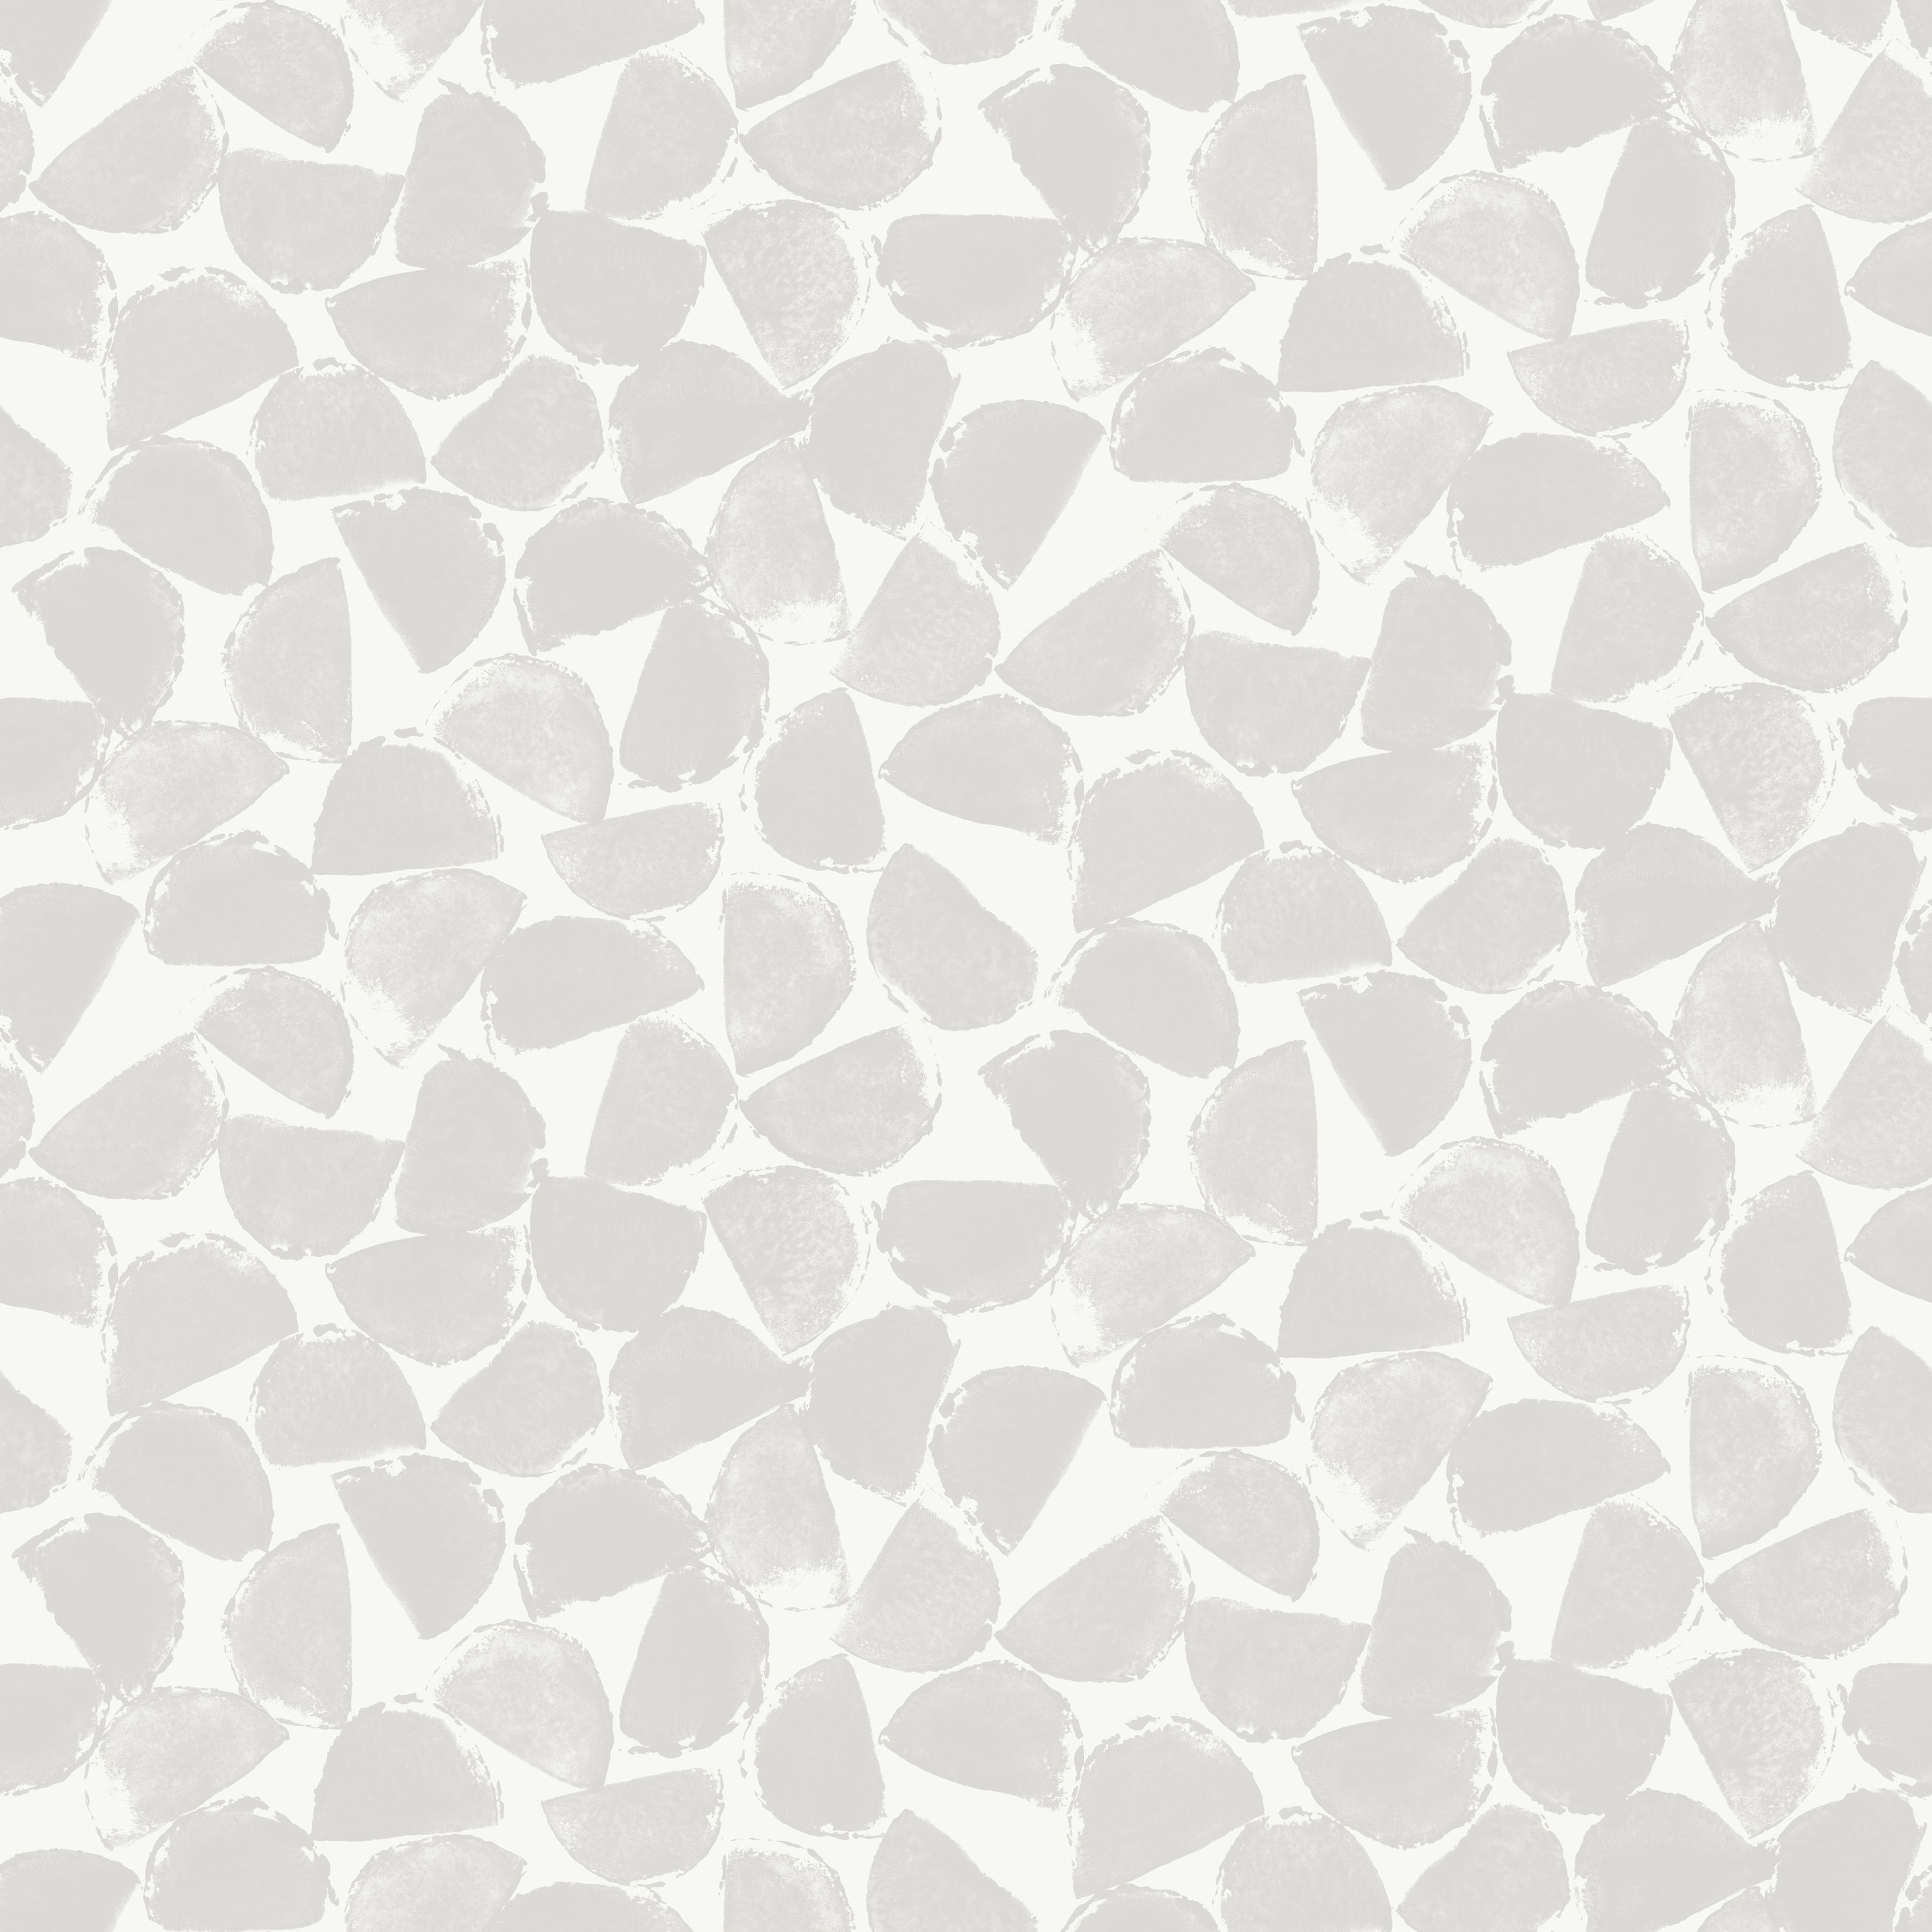 Black Grey Abstract Self Adhesive Contact Paper, Peel and Stick